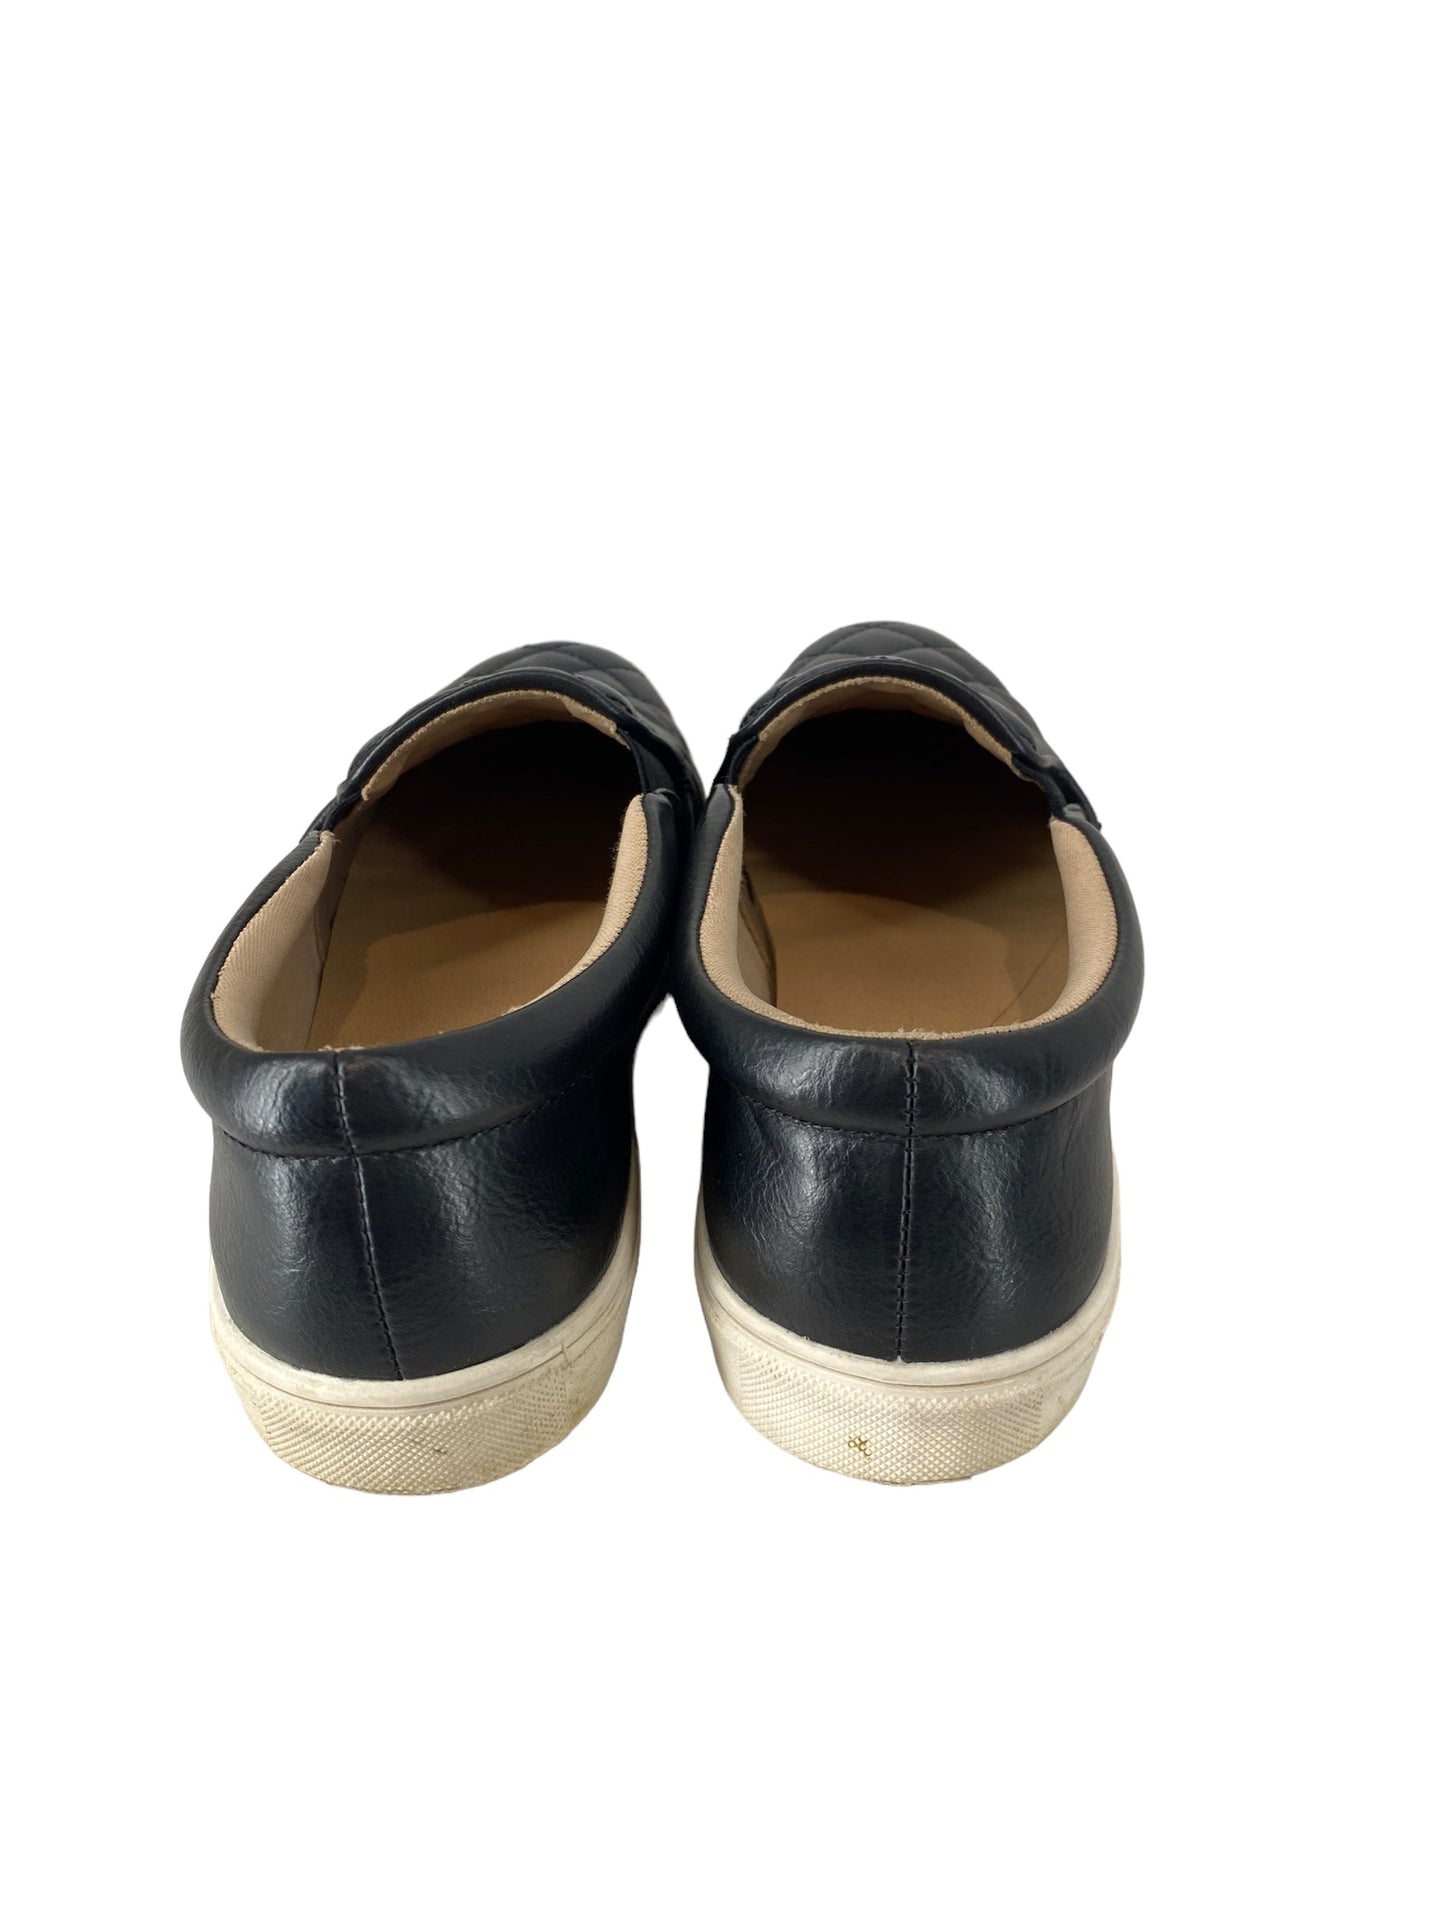 Black Shoes Flats A New Day, Size 7